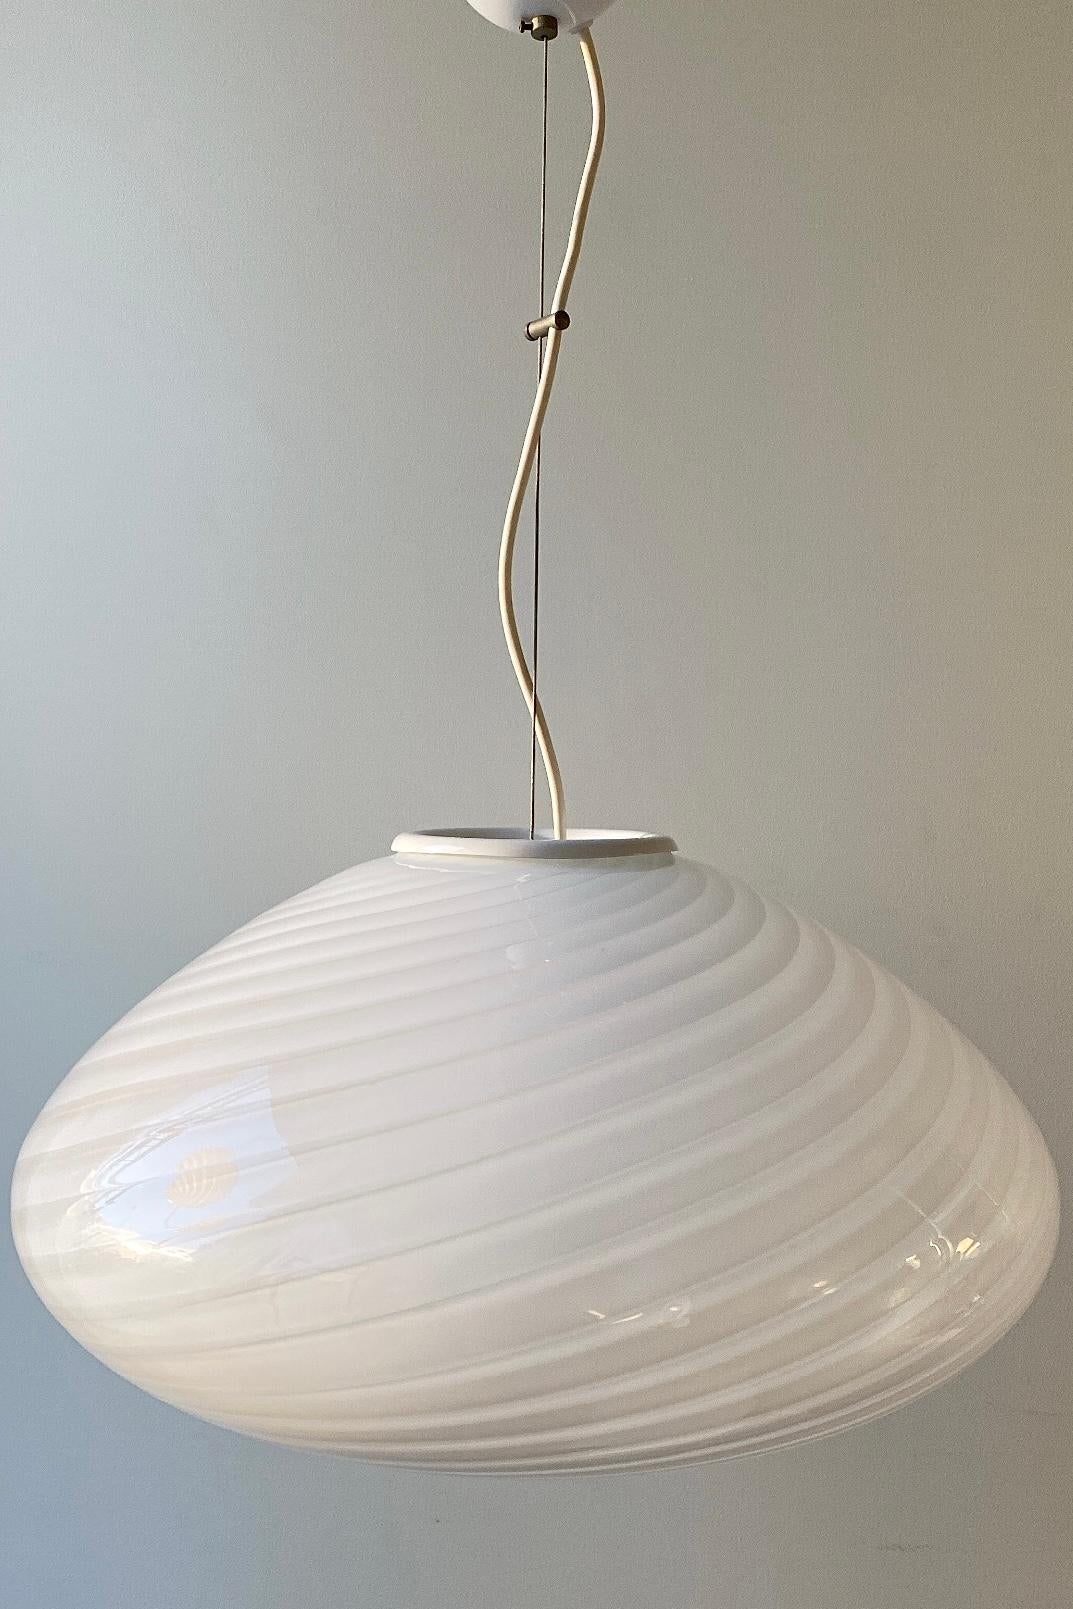 Extra-large vintage Murano pendant ceiling lamp in opaline glass. The glass is mouth-blown in an oval shape with a beautiful swirl pattern. Handcrafted in Italy, 1970s, and comes with adjustable suspension. D: 50cm H: 26cm (glass).